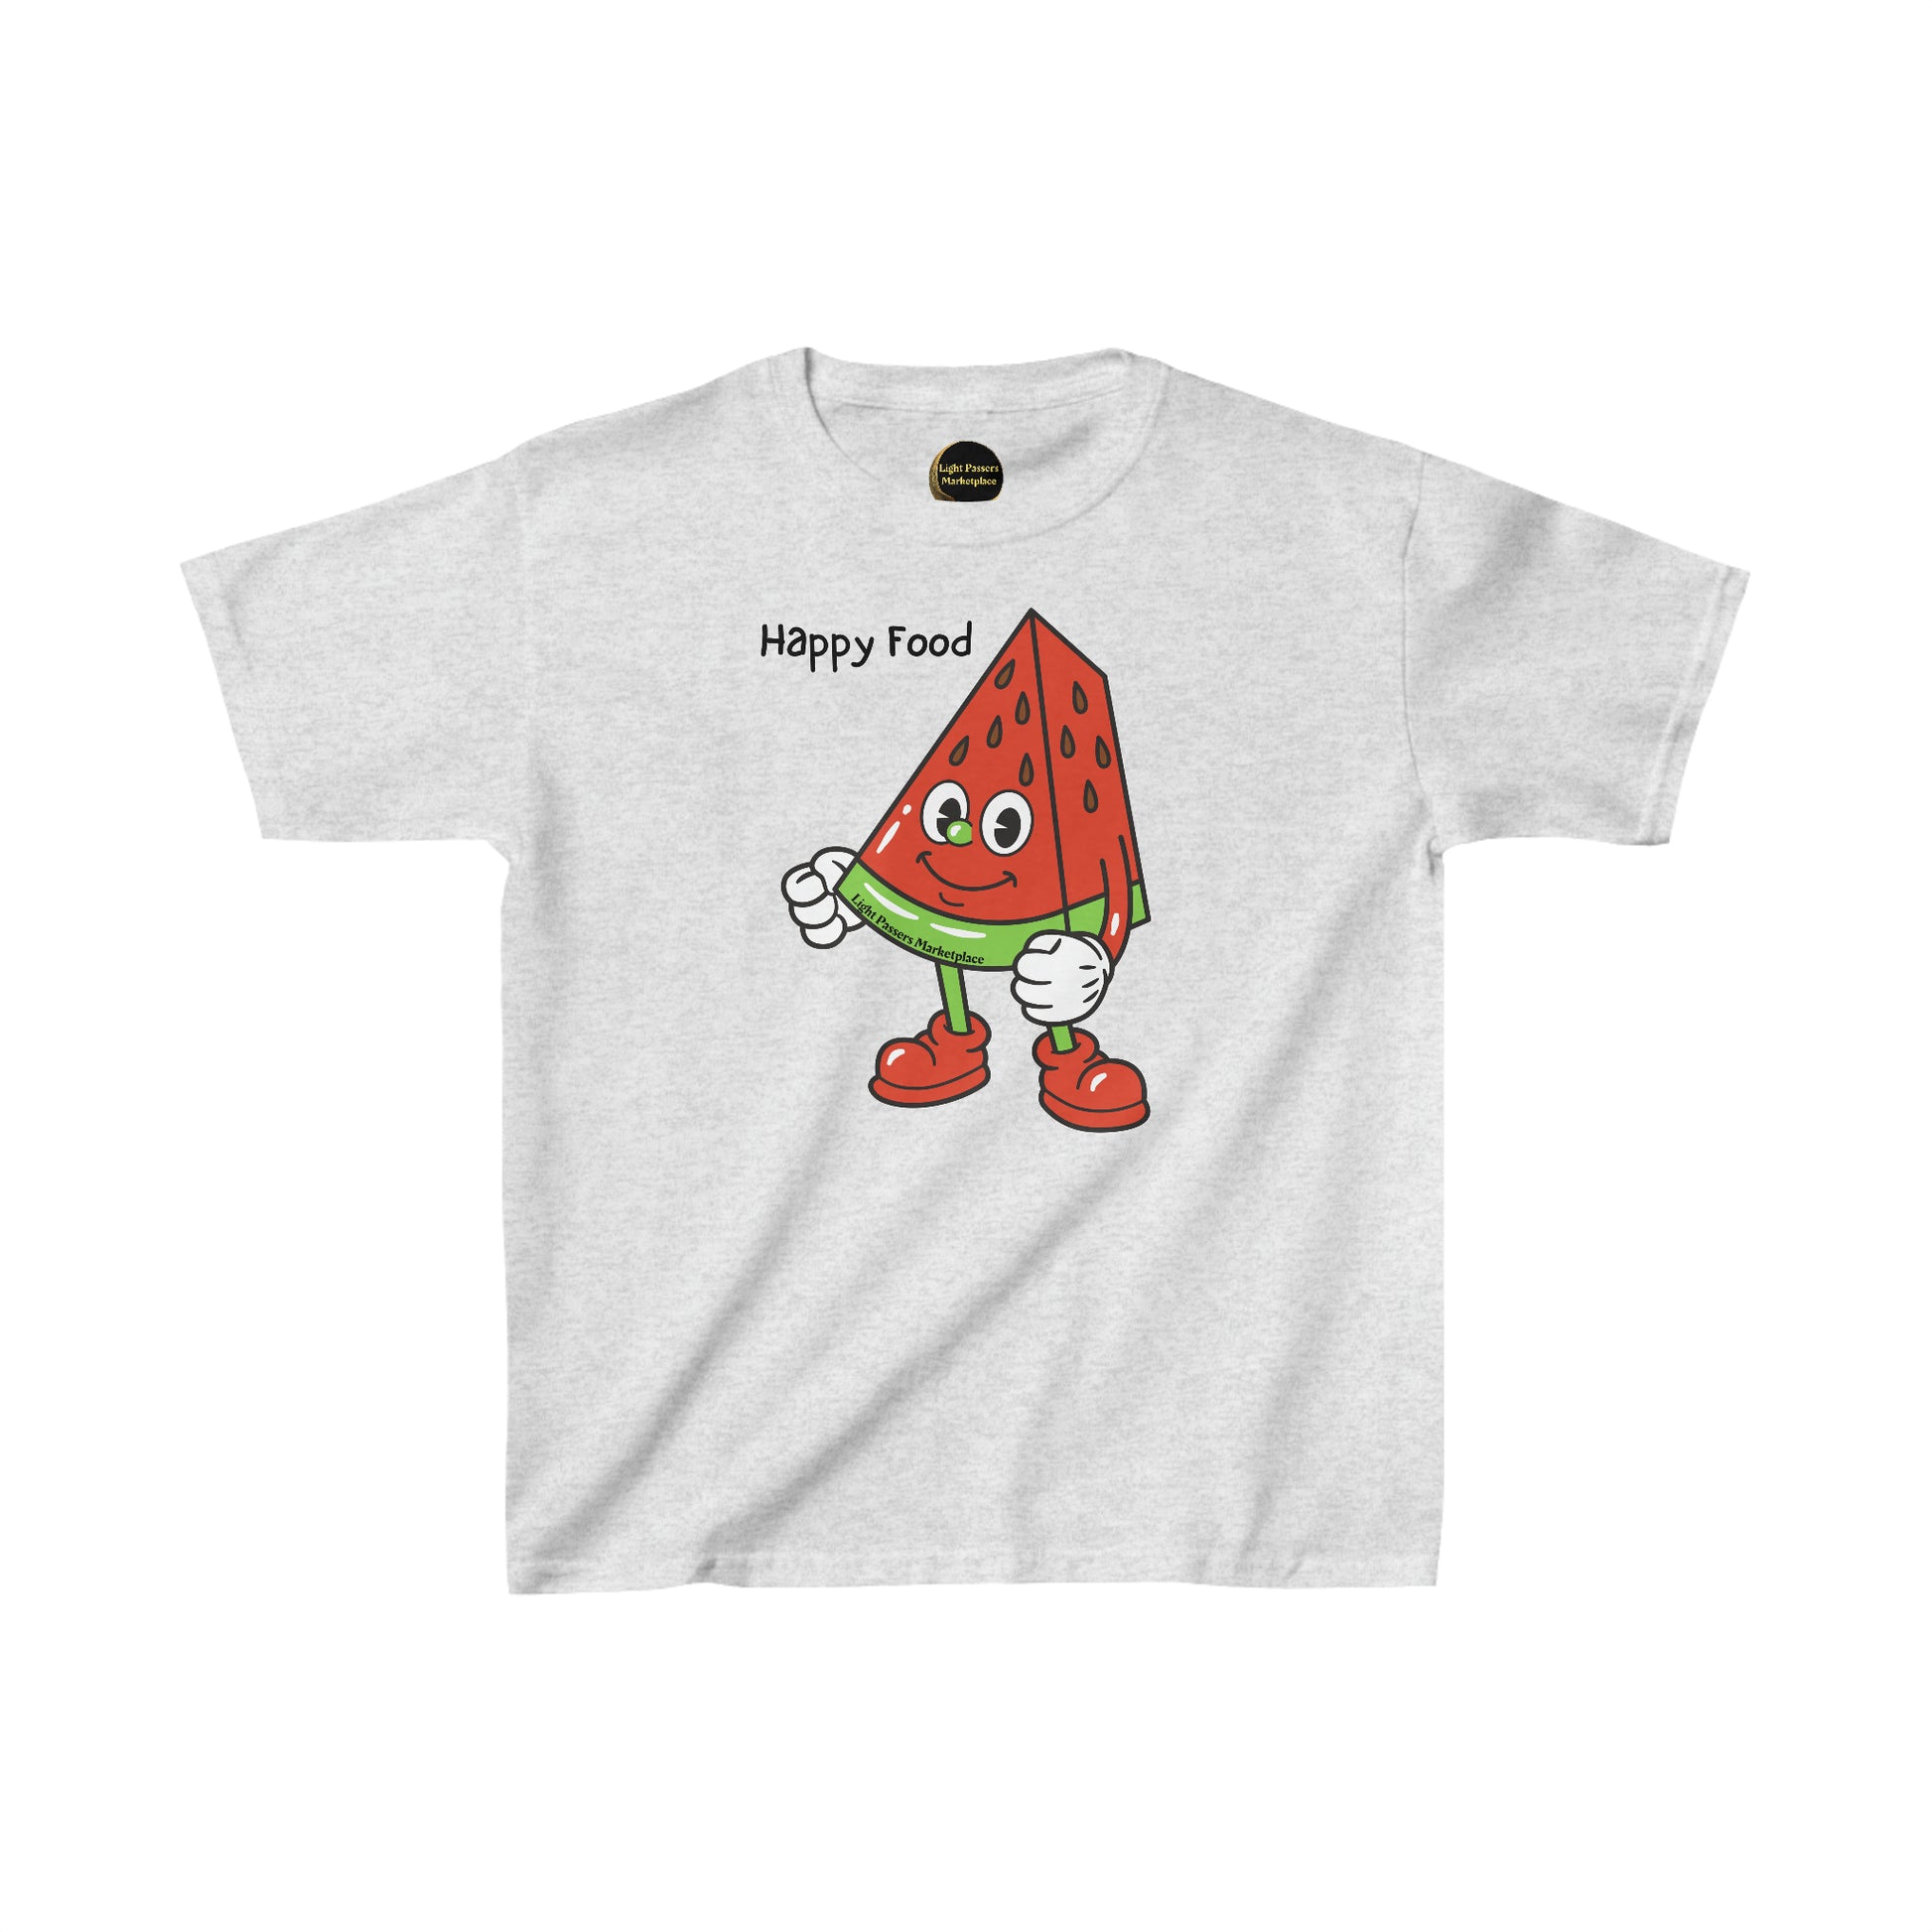 A white youth t-shirt featuring a cartoon watermelon design, made of 100% cotton for comfort and durability. Ethically sourced and perfect for everyday wear.